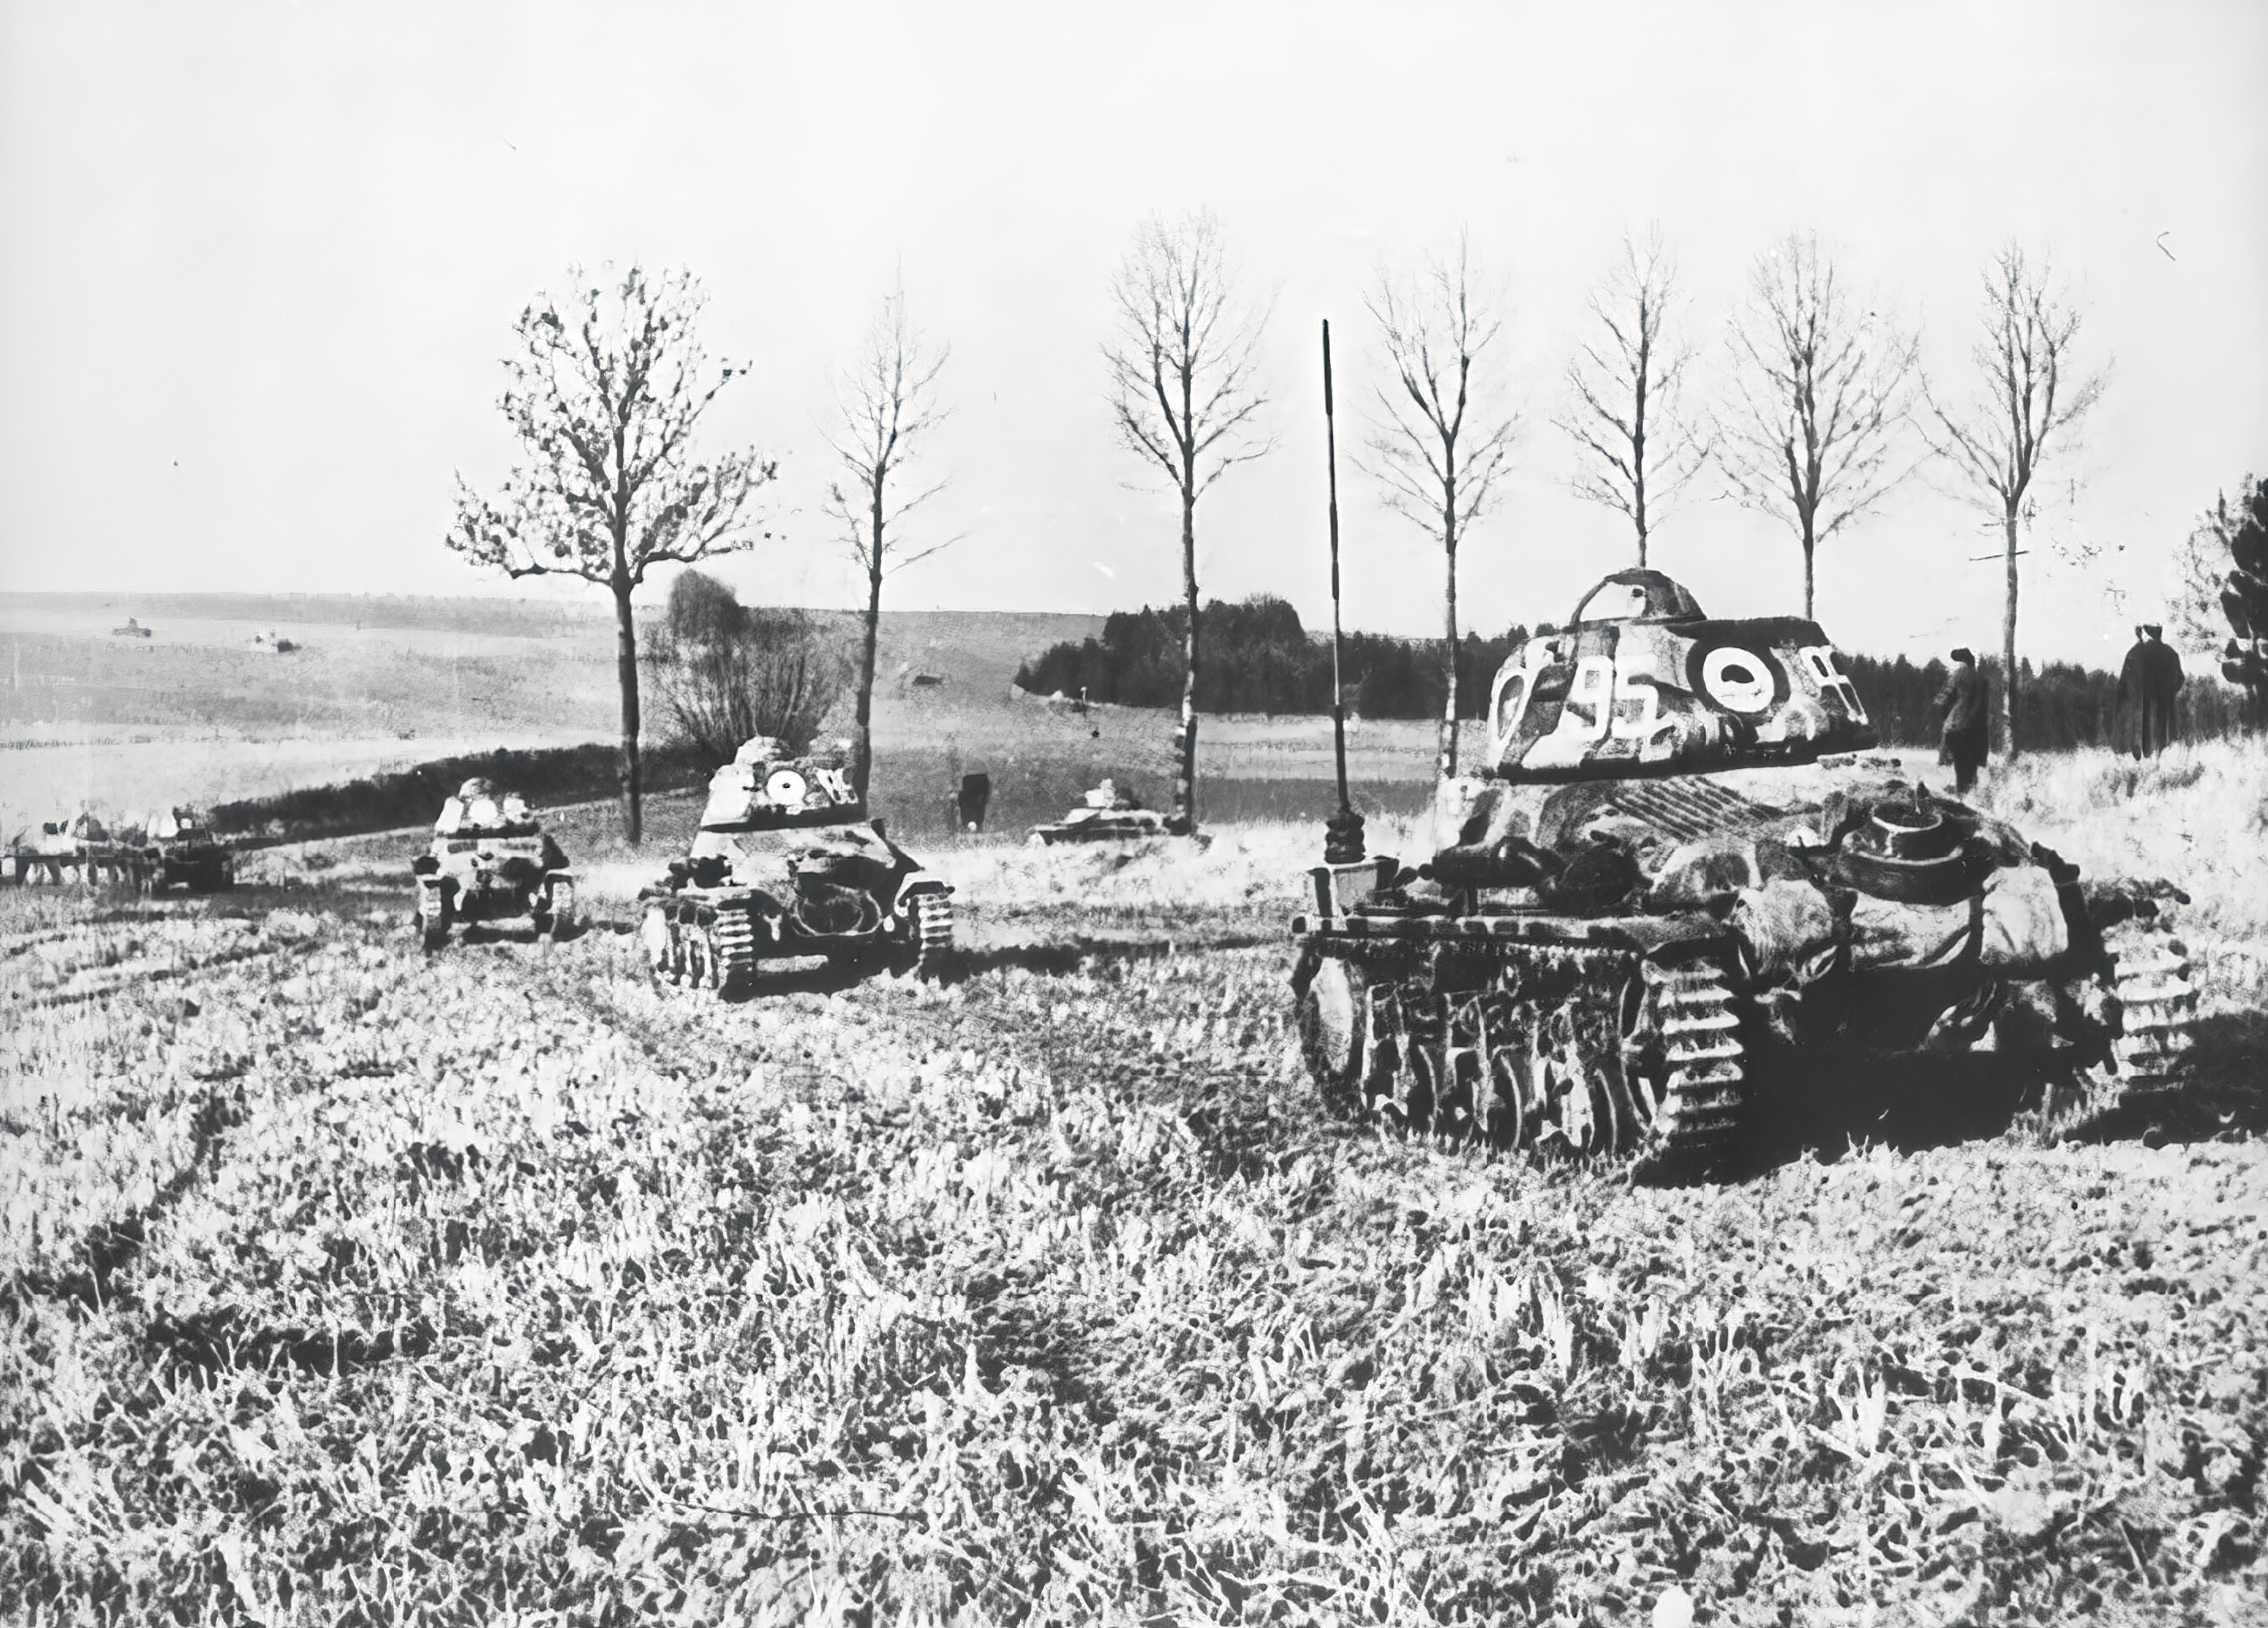 French armor being deployed during manoeuvres 9th Jan 1940 NIOD